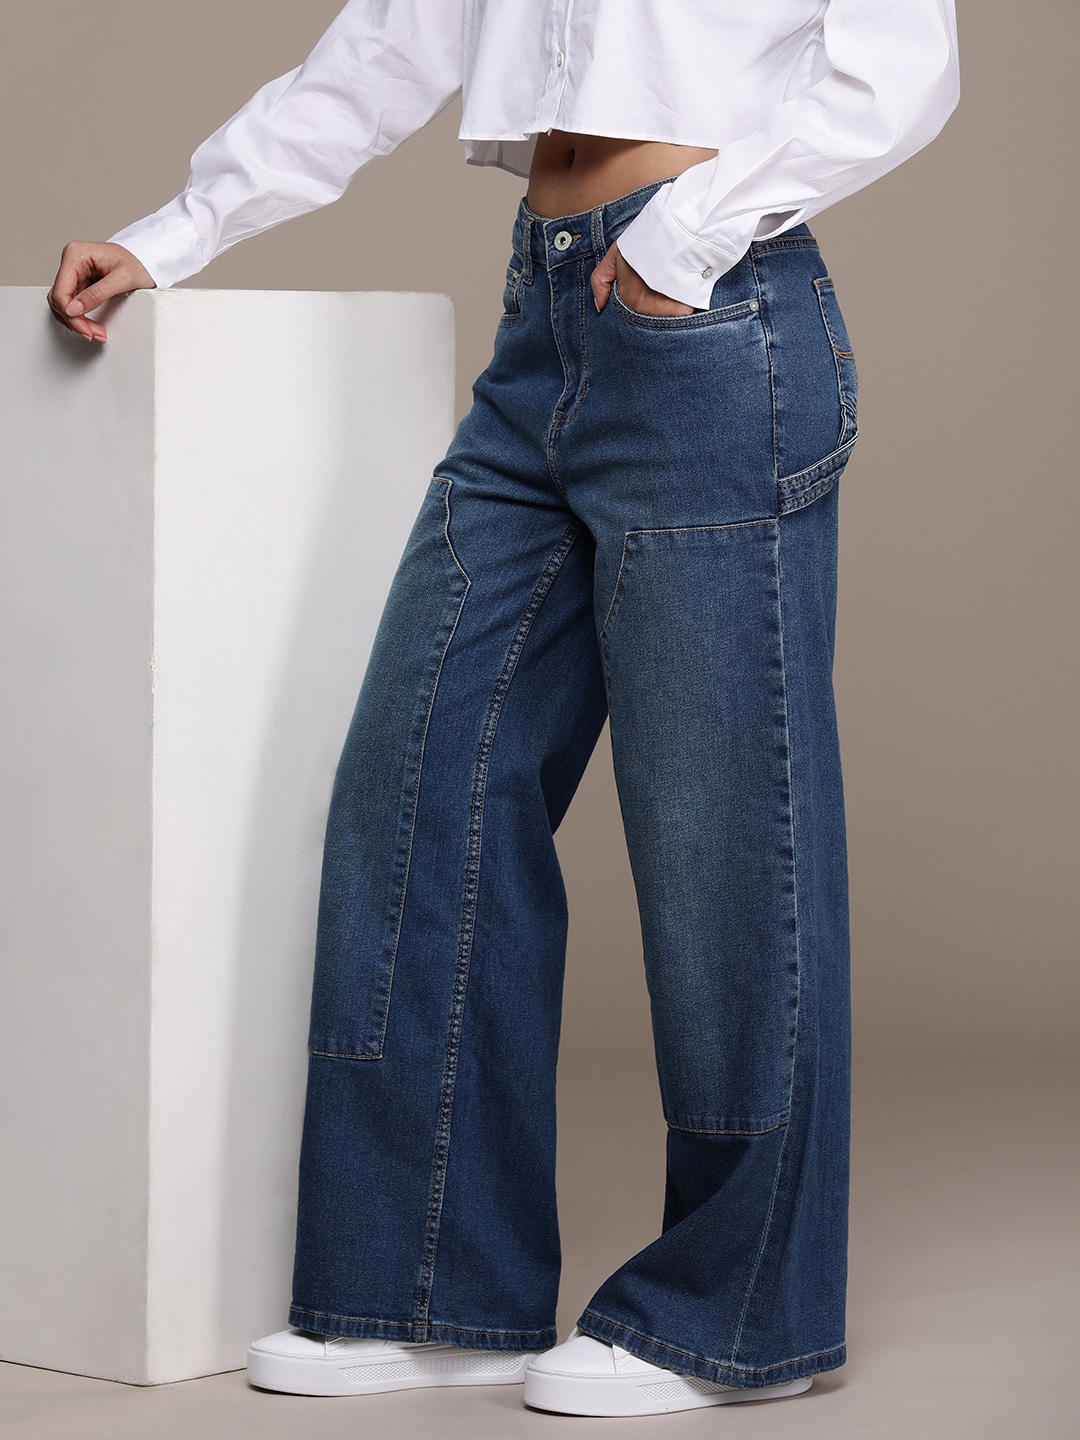 The Roadster Lifestyle Co. Women Wide Leg Stretchable Baggy Jeans